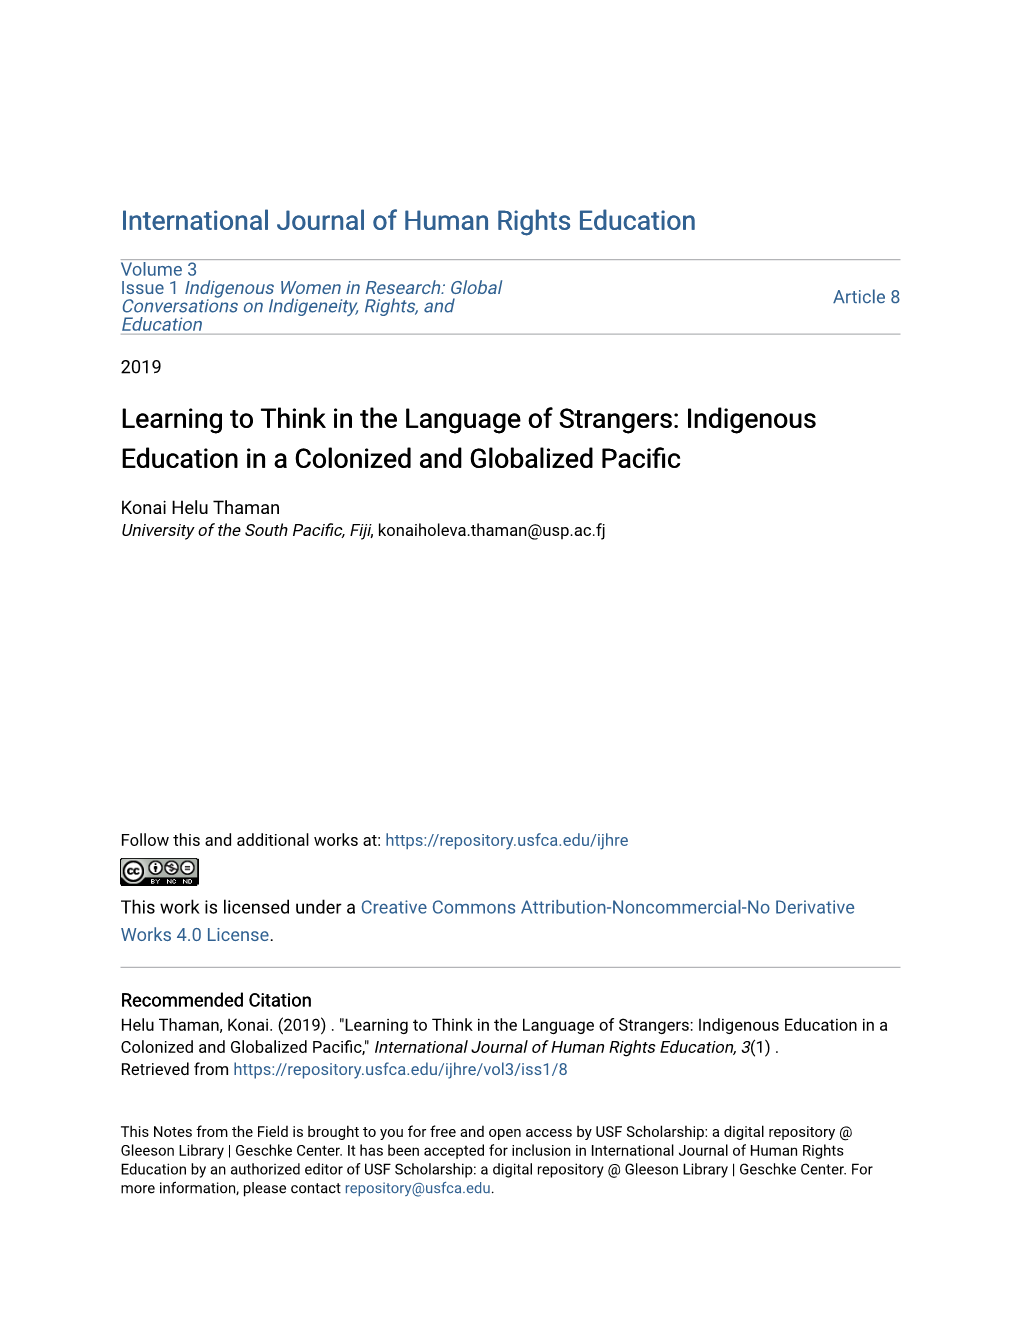 Indigenous Education in a Colonized and Globalized Pacific